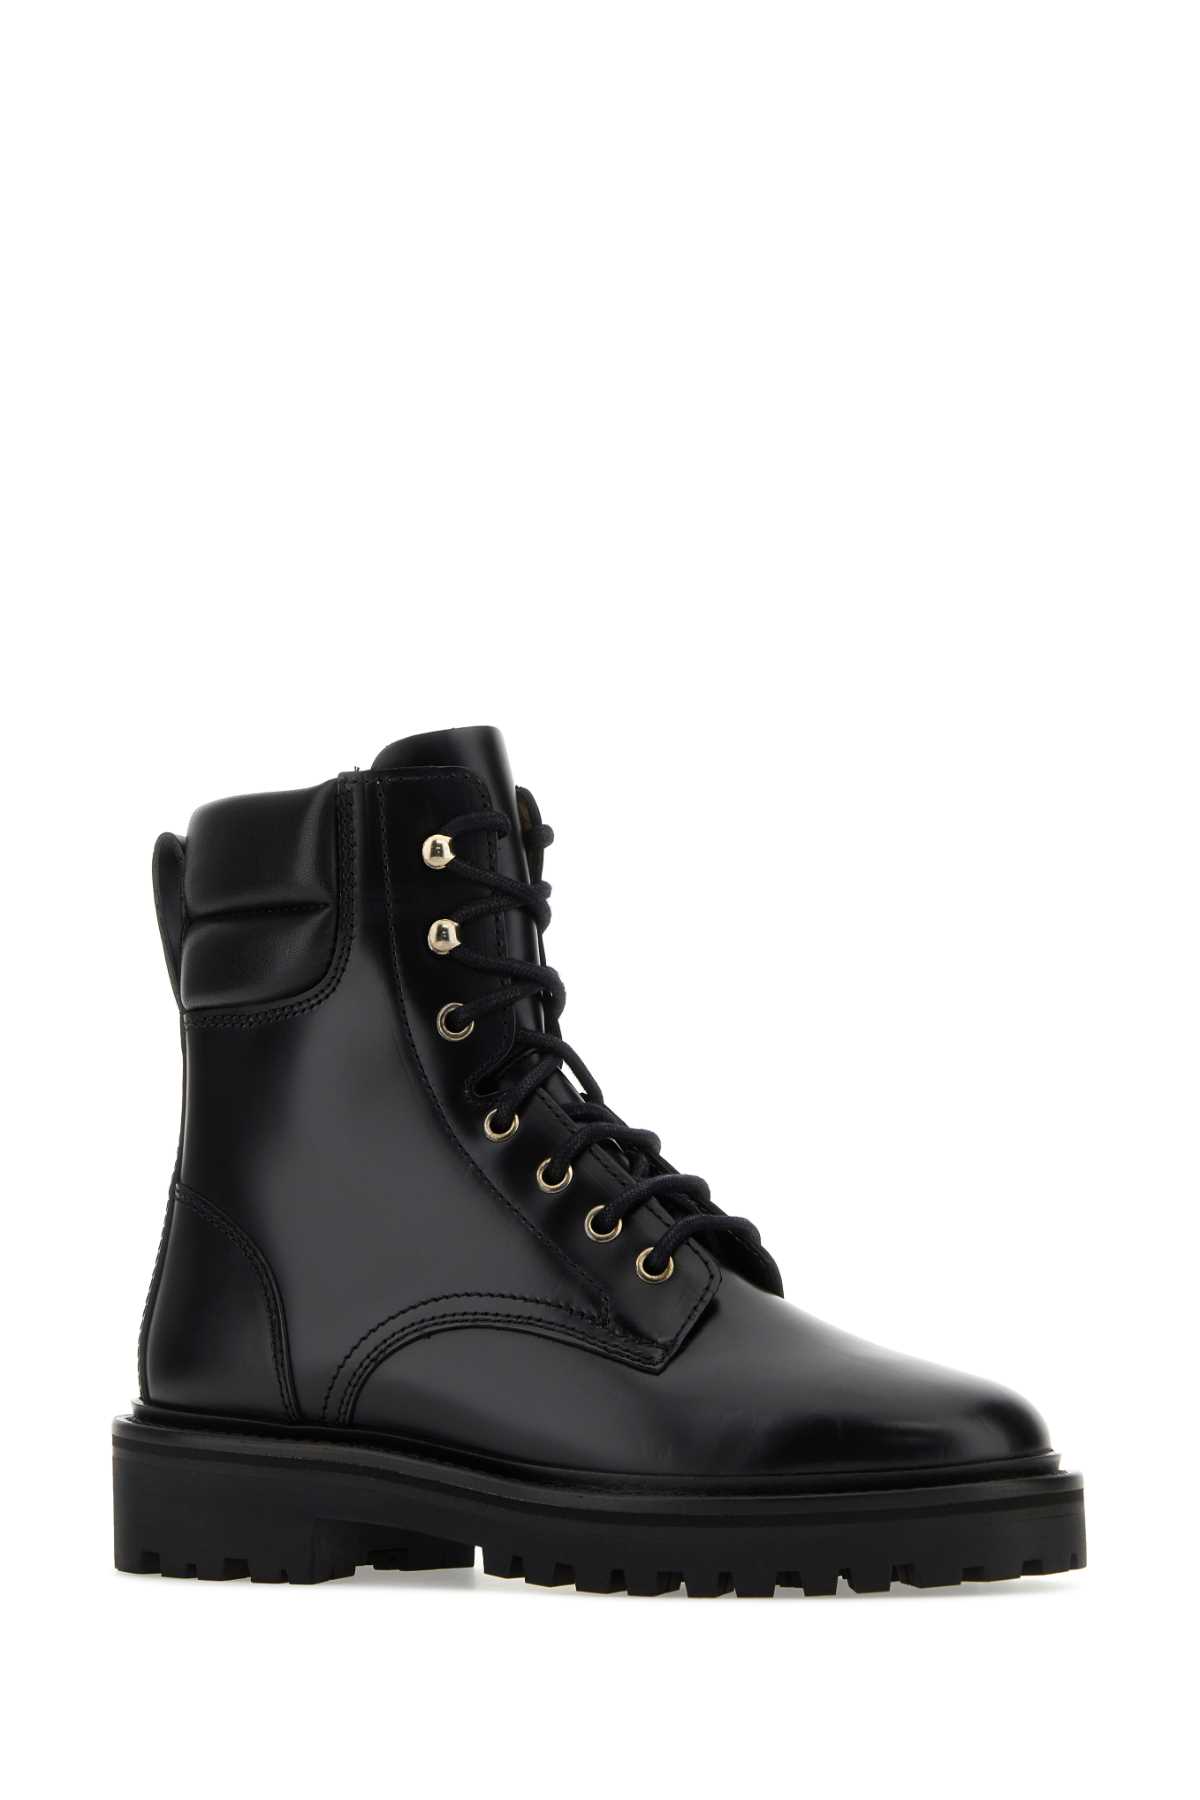 Isabel Marant Black Leather Campa Ankle Boots